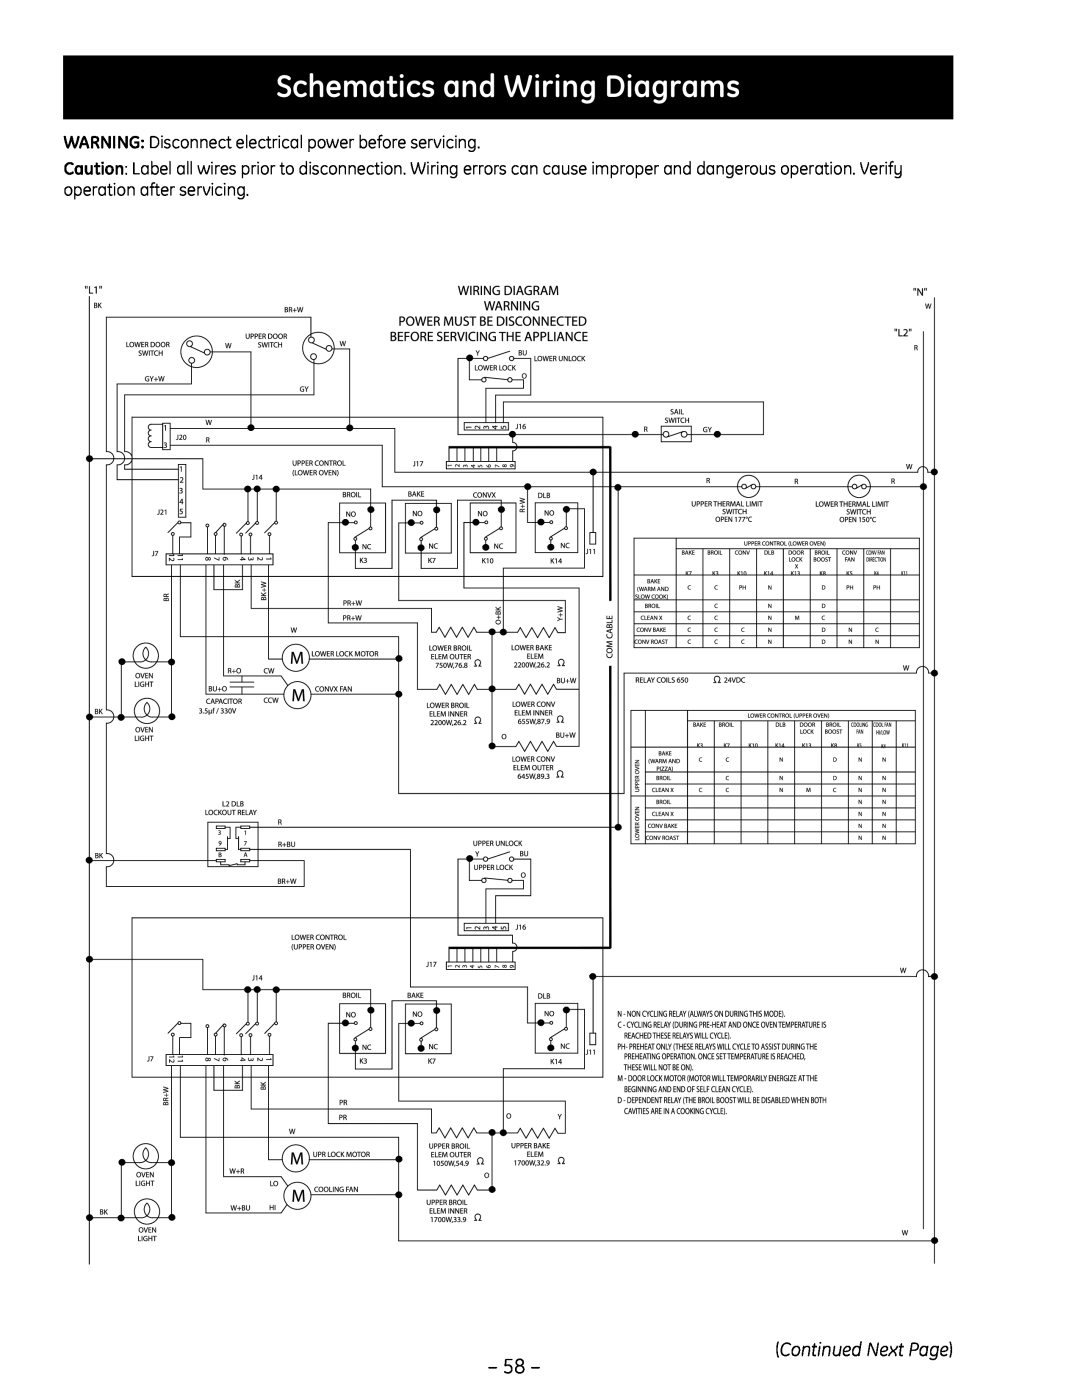 GE PT925 manual Schematics and Wiring Diagrams, WARNING Disconnect electrical power before servicing 